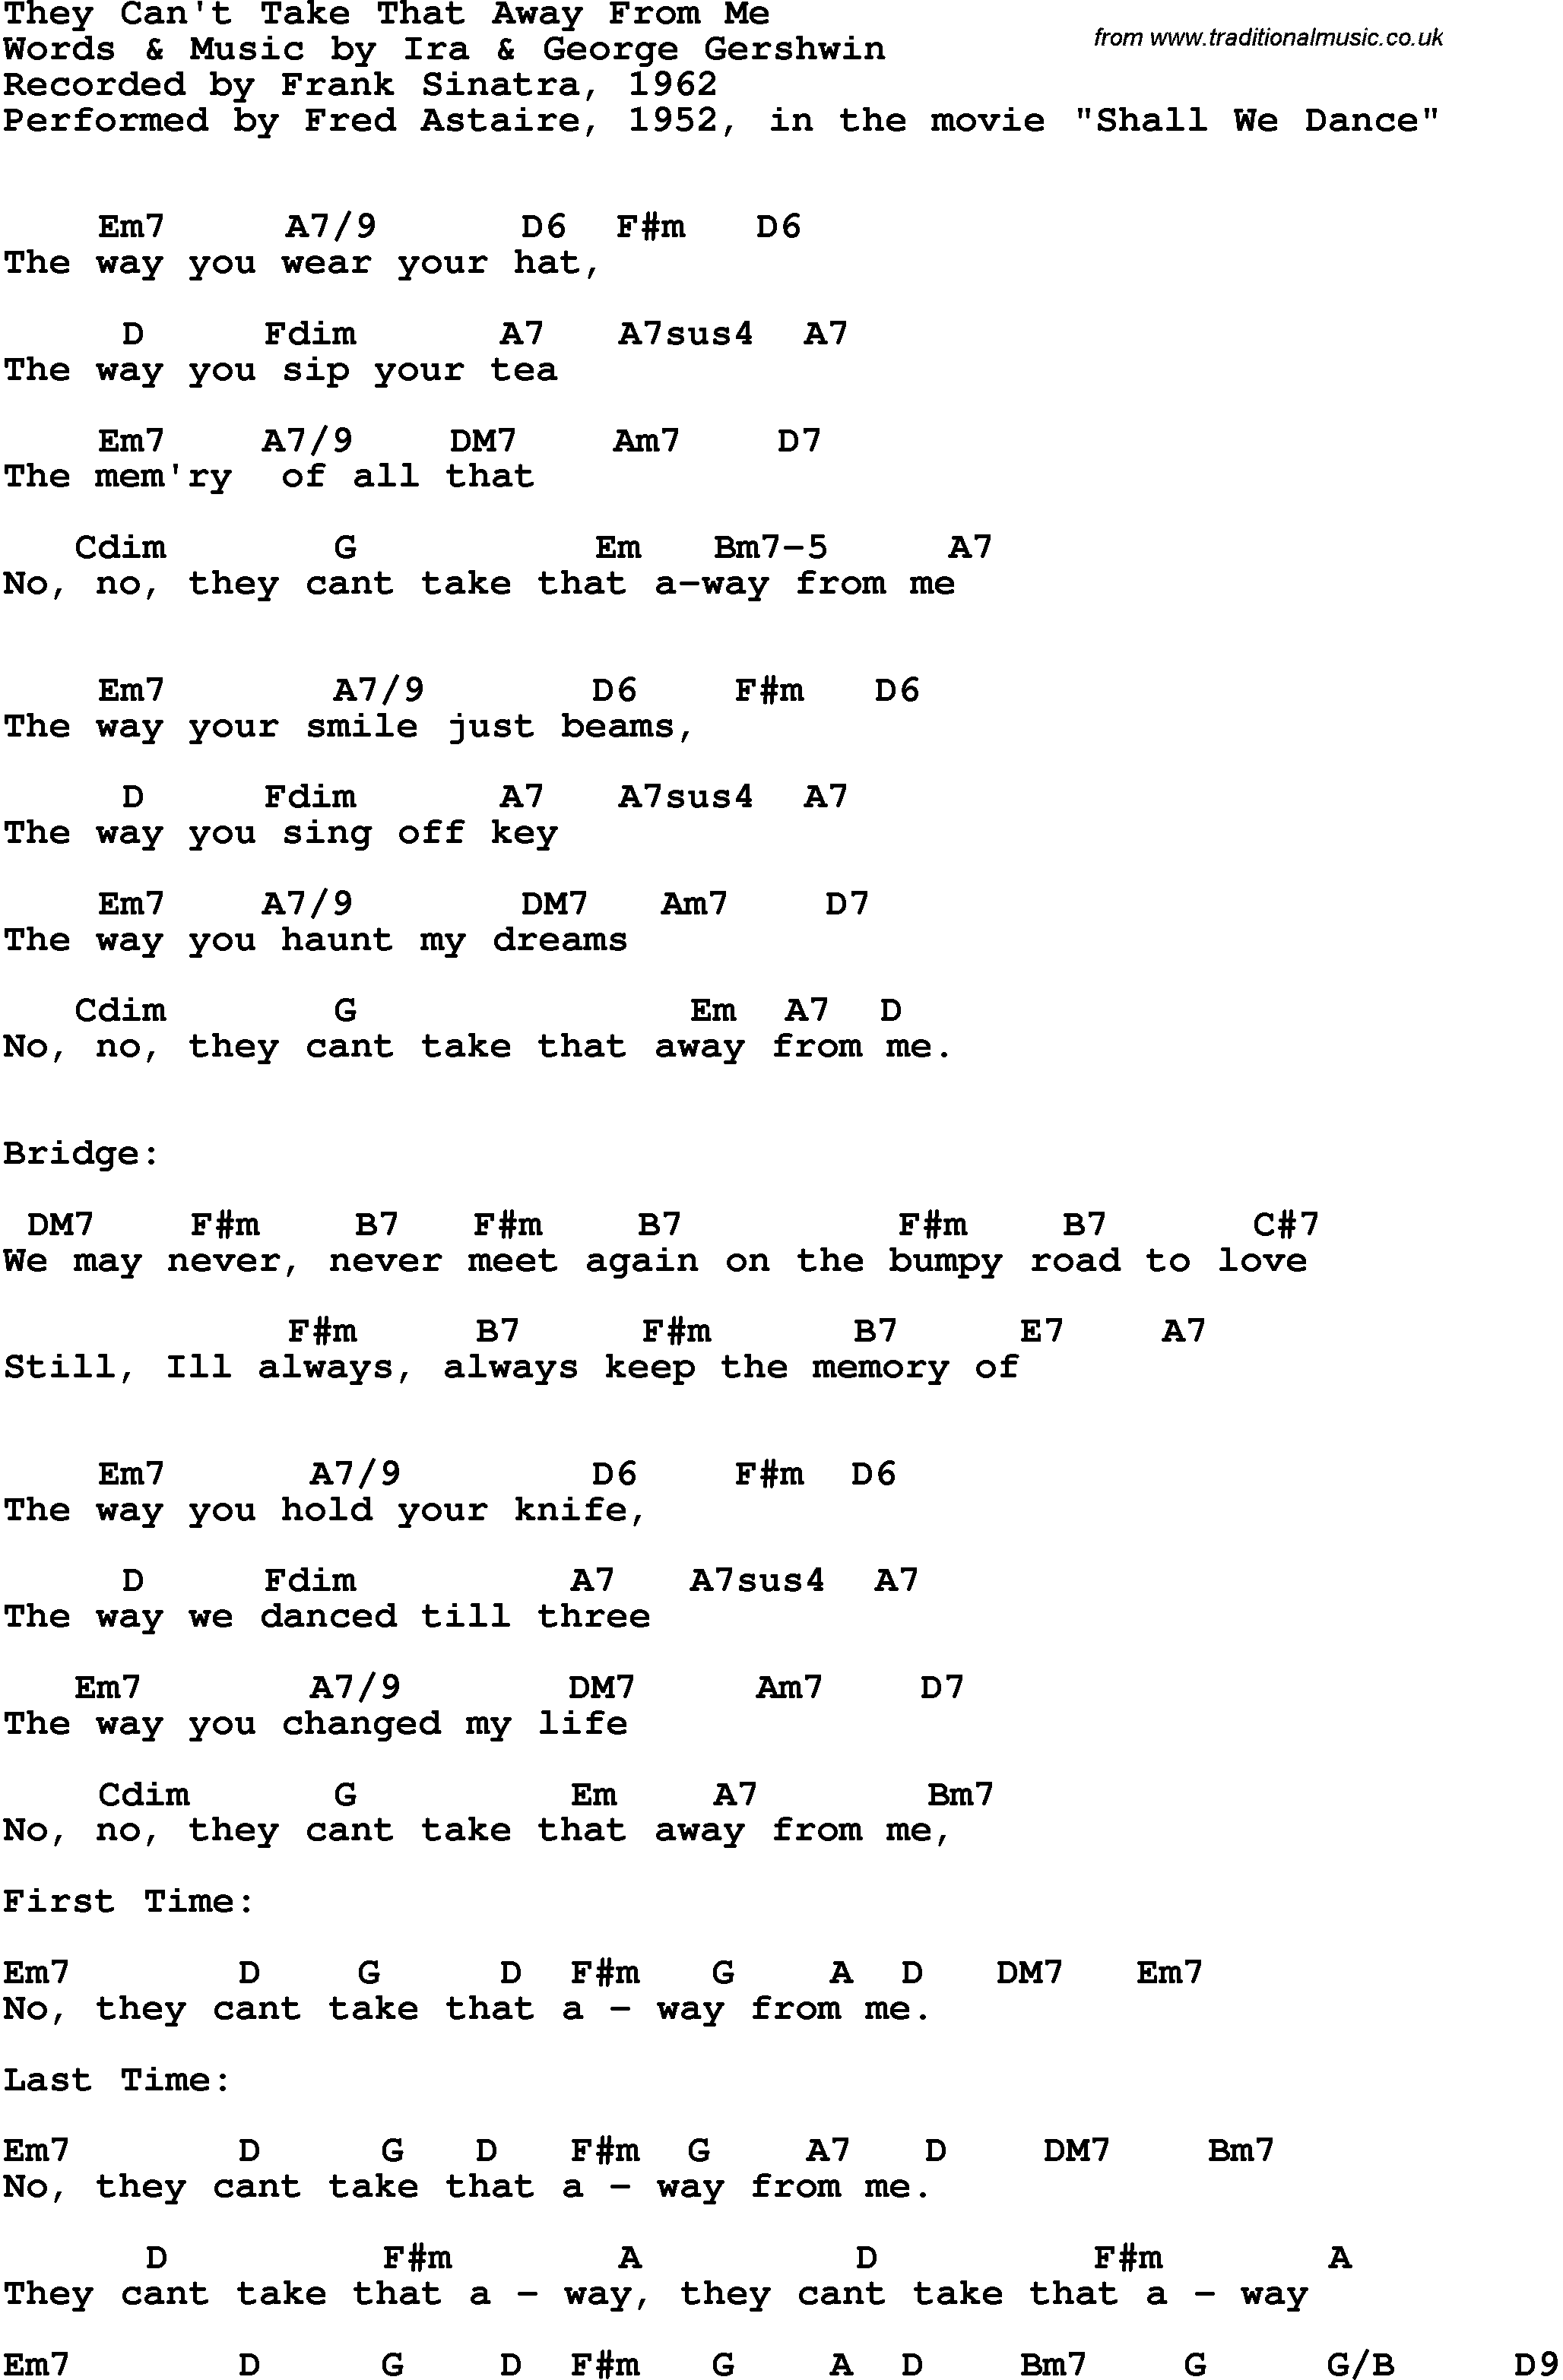 Song Lyrics with guitar chords for They Can't Take That Away From Me - Frank Sinatra, 1962